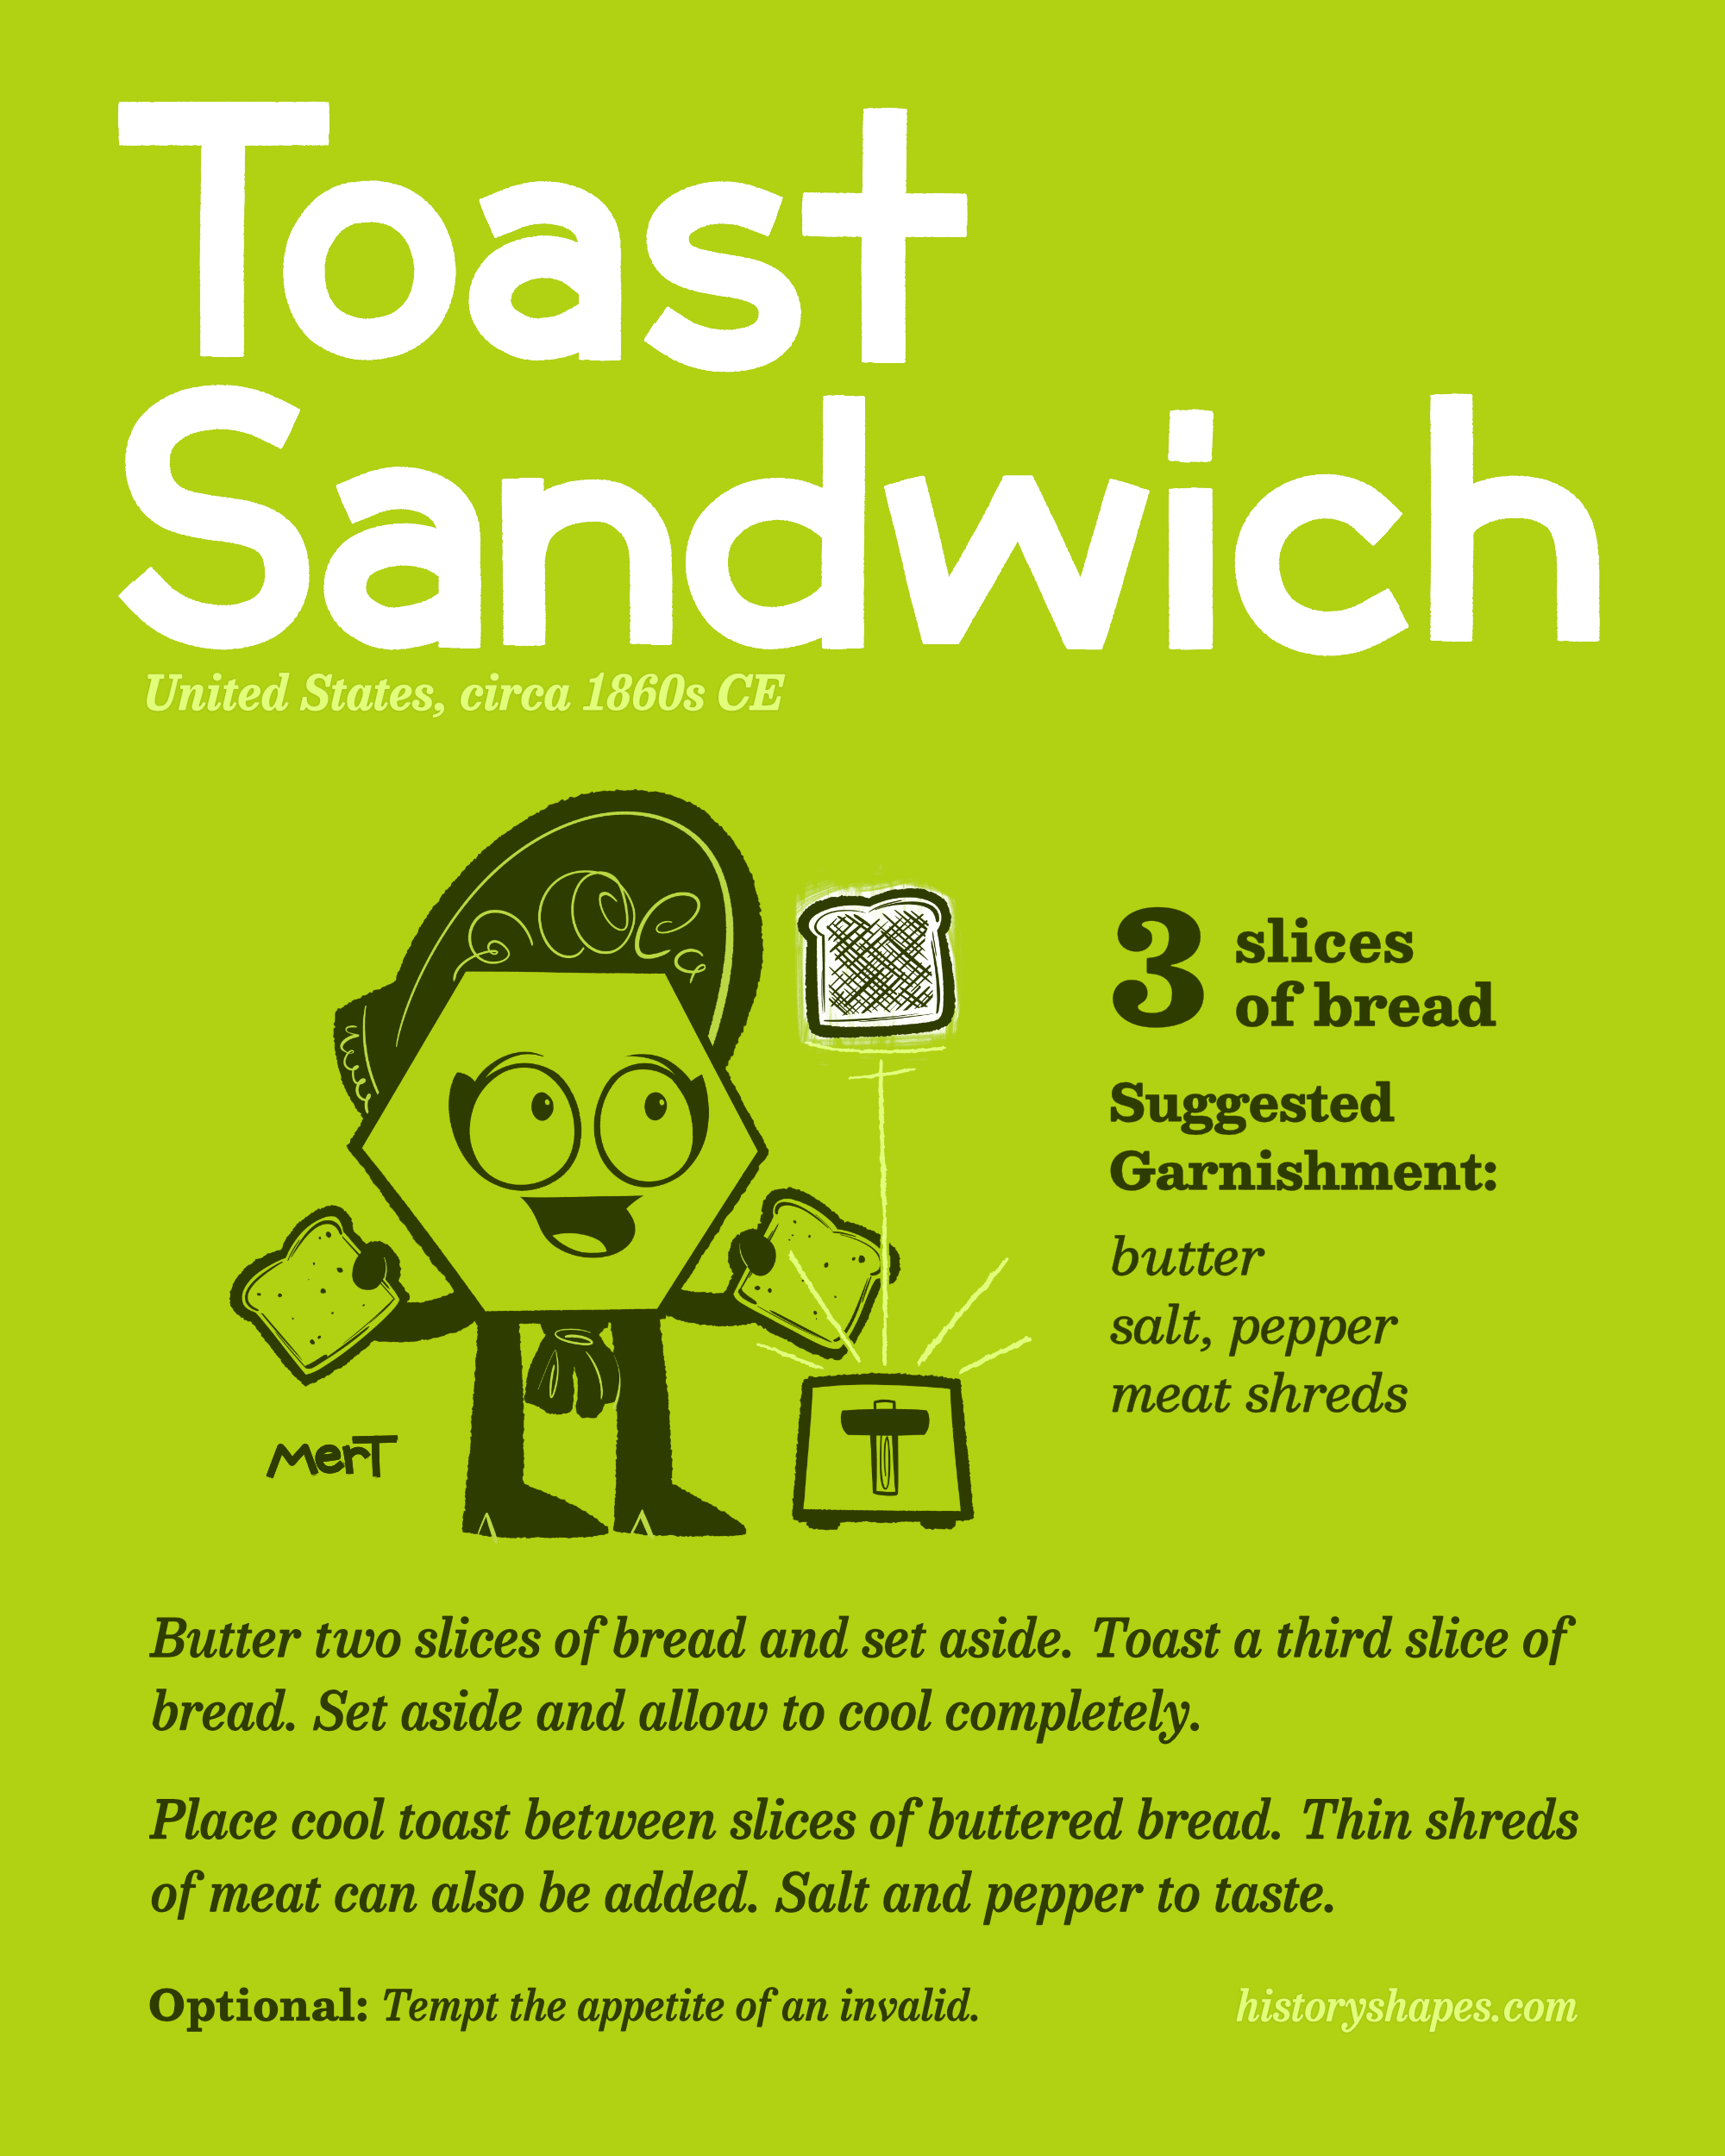 Lou wears an 1860s bonnet and holds two slices of bread as toast shoots out of a toaster. The recipe for Toast Sandwiches is listed.